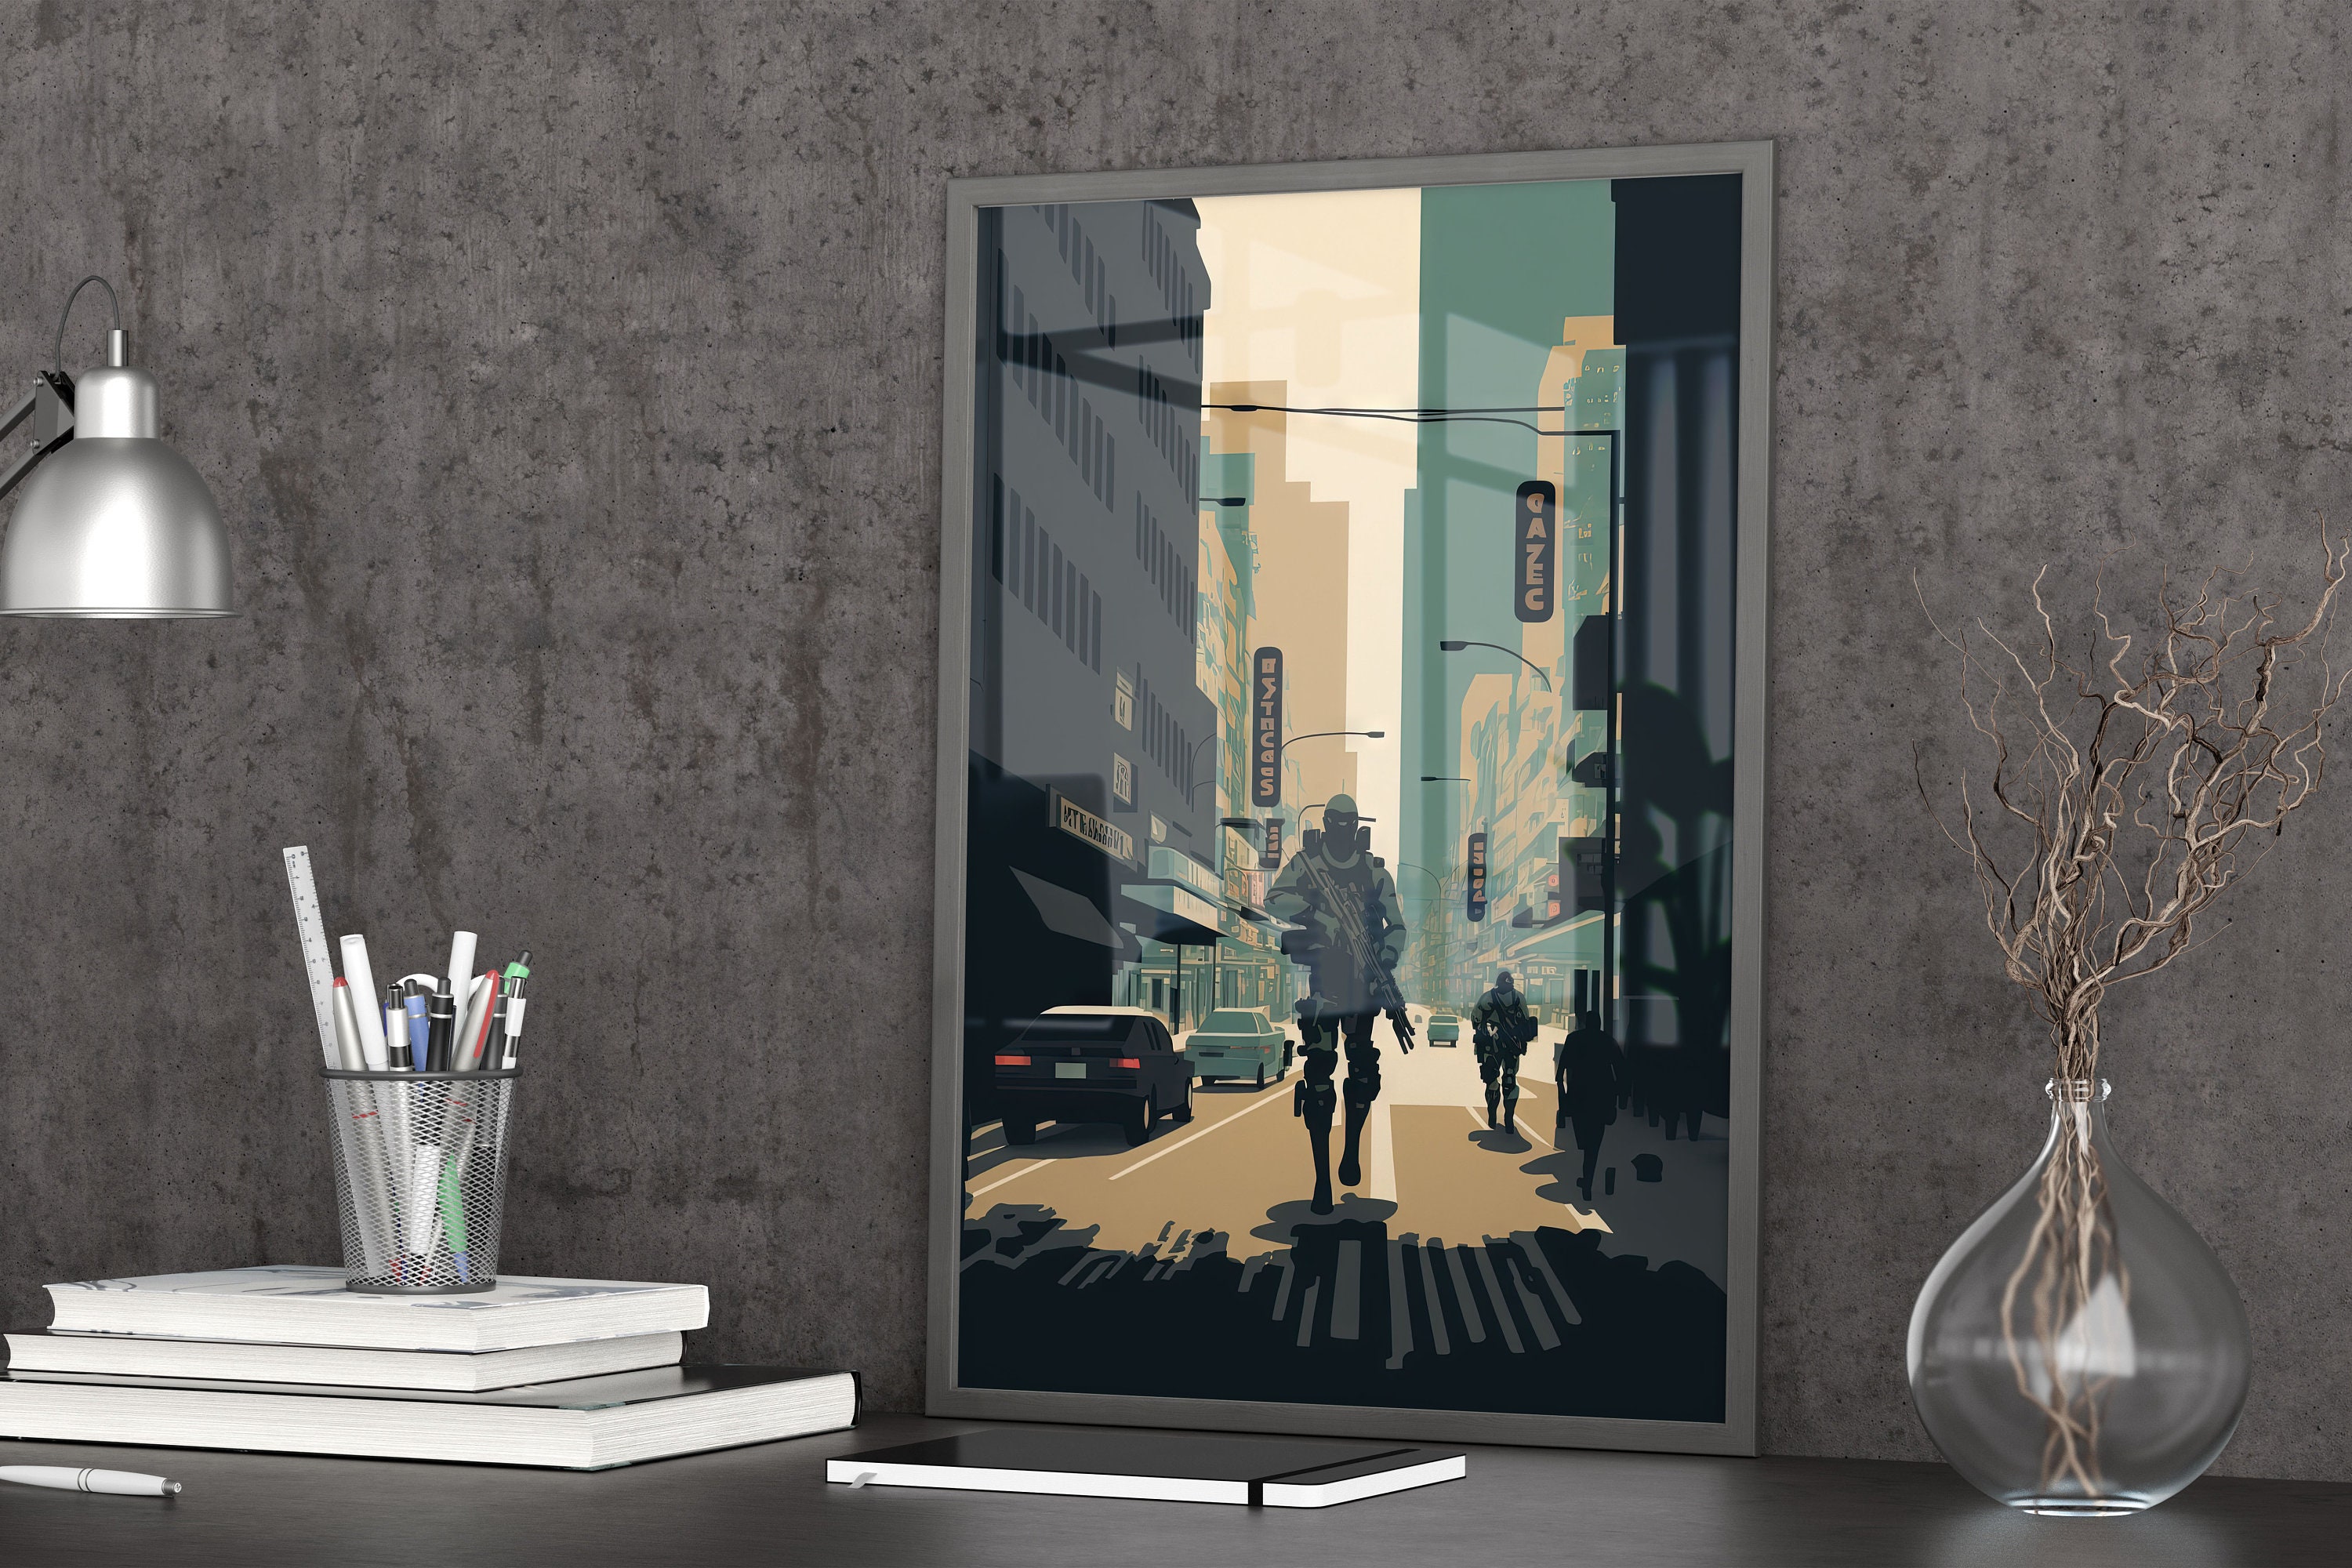 Video Game Escape From Tarkov Solider Kraft Paper Poster Wall Artwork Print  Painting Home Modular Pictures